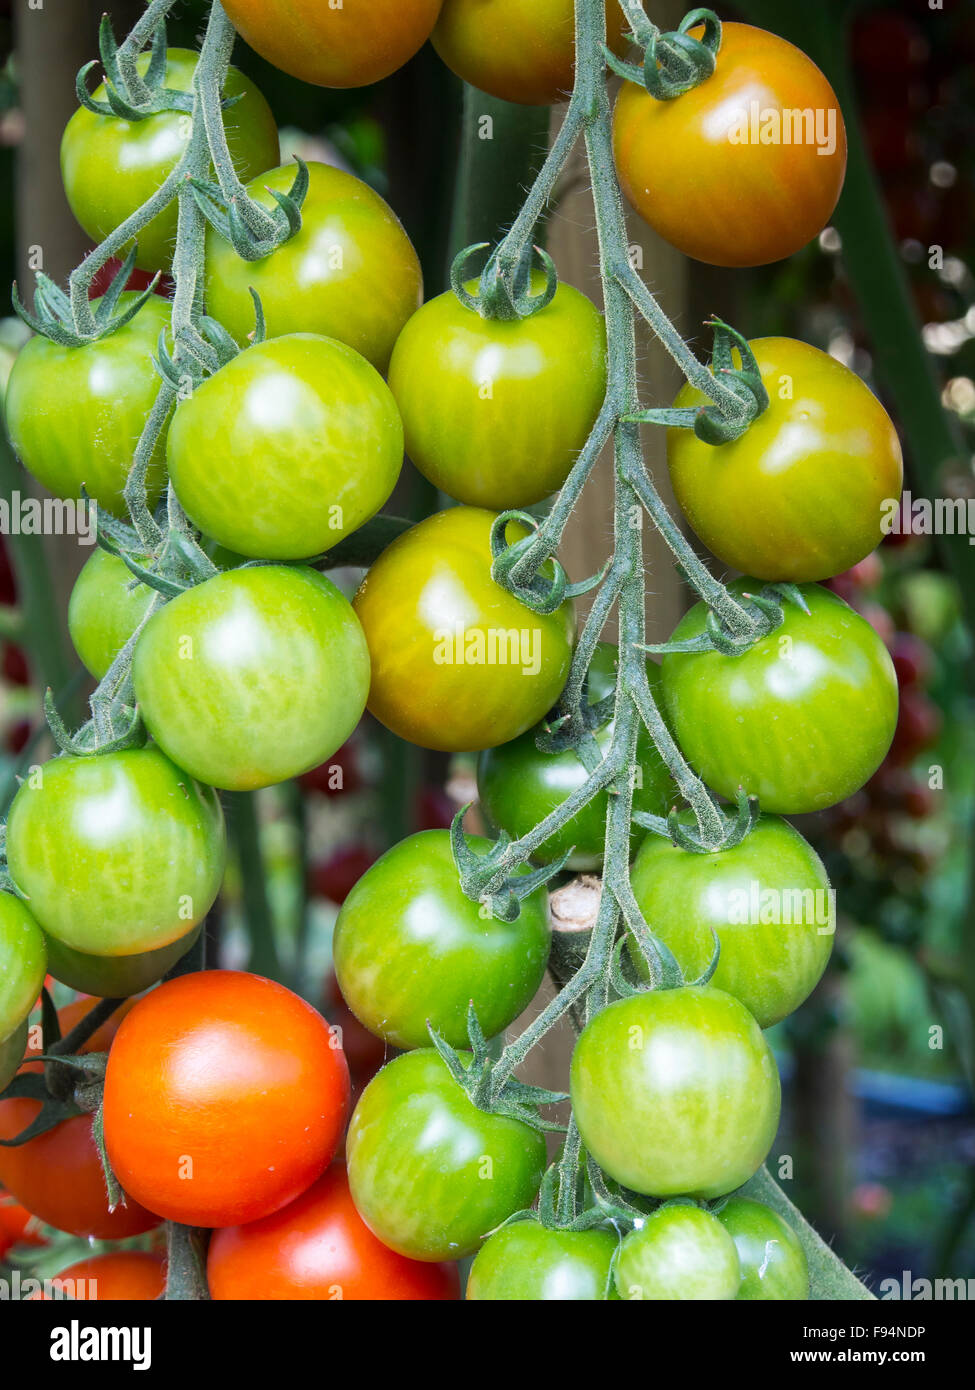 Red and green bunches of coctail tomatos ripening in the sun Stock Photo